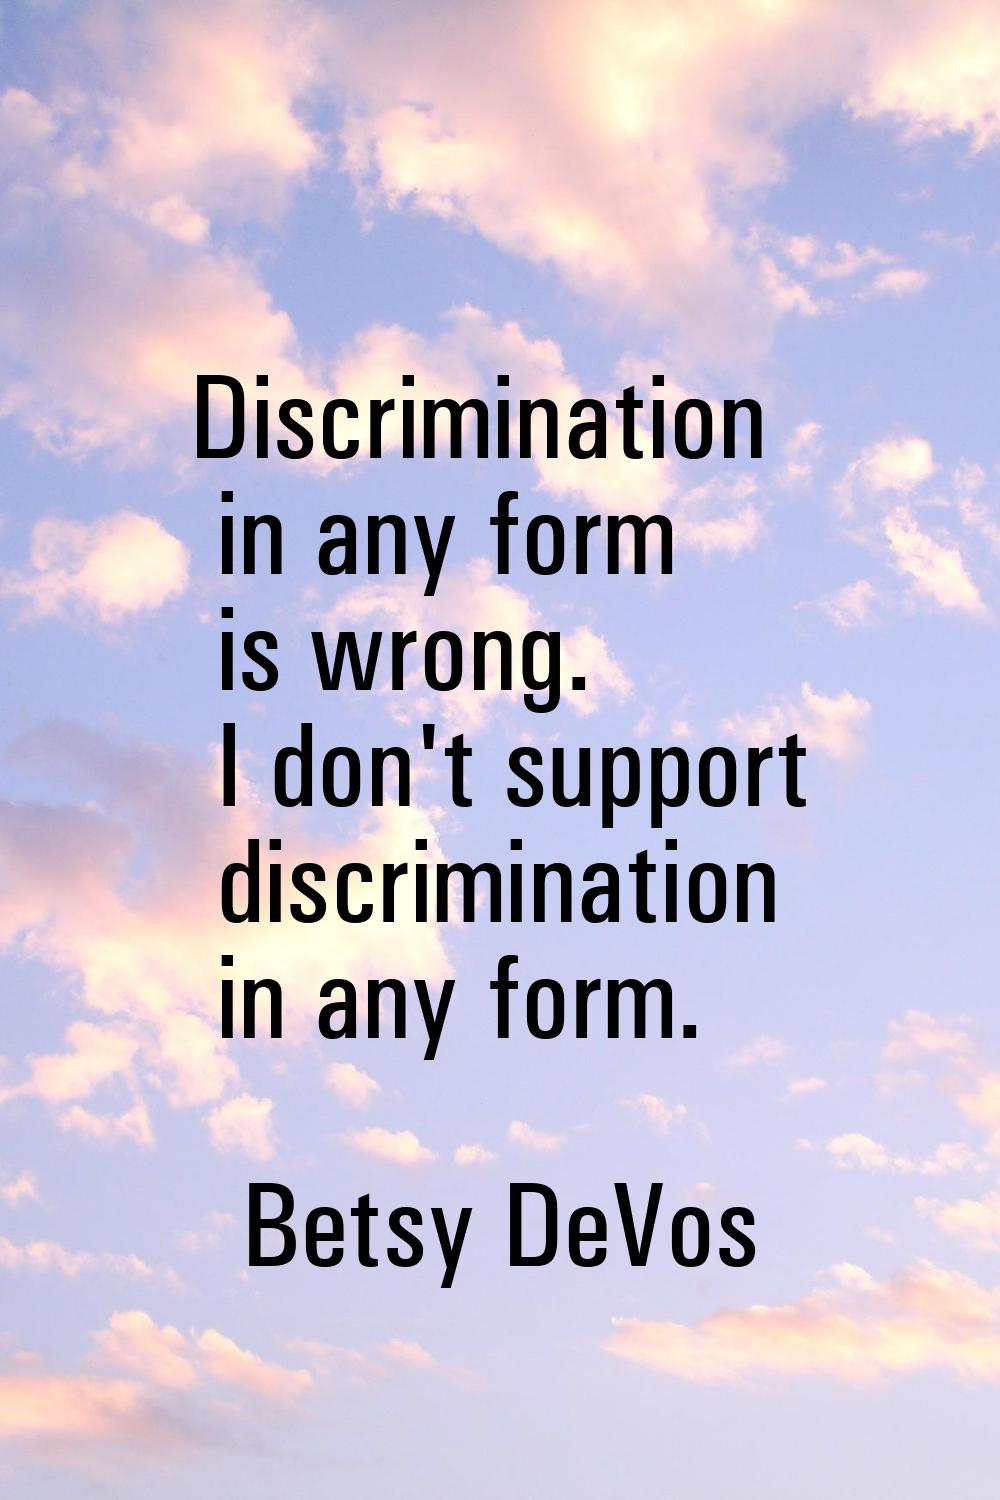 Discrimination in any form is wrong. I don't support discrimination in any form.